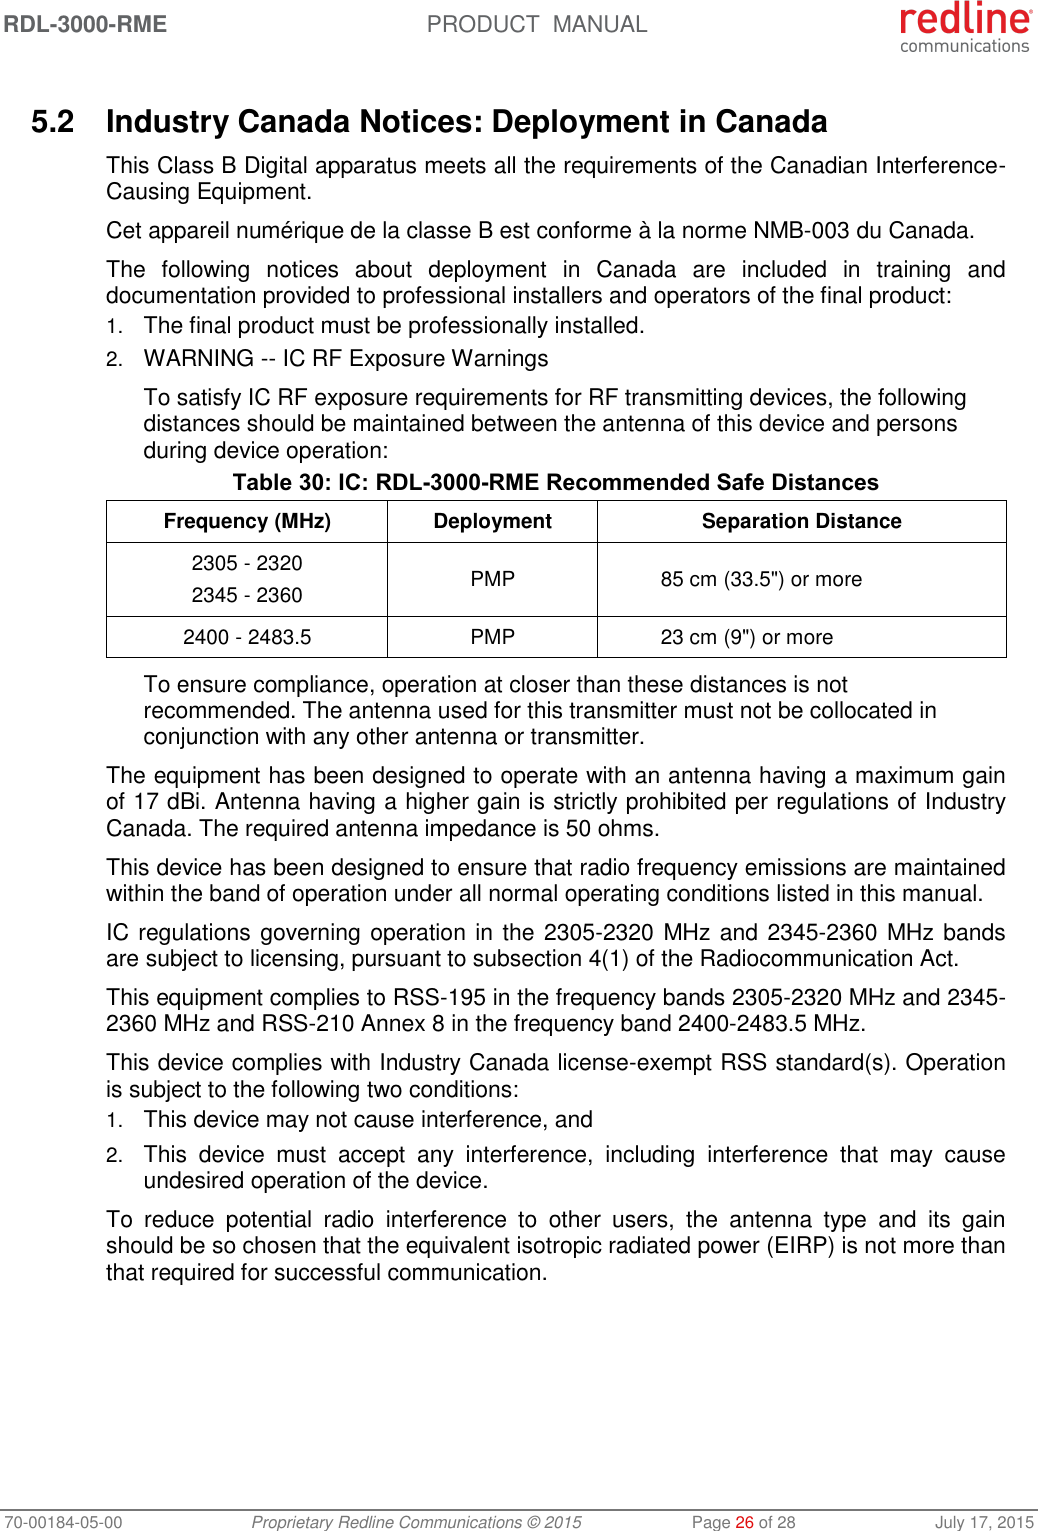 RDL-3000-RME  PRODUCT  MANUAL 70-00184-05-00 Proprietary Redline Communications © 2015  Page 26 of 28  July 17, 2015  5.2  Industry Canada Notices: Deployment in Canada This Class B Digital apparatus meets all the requirements of the Canadian Interference-Causing Equipment. Cet appareil numérique de la classe B est conforme à la norme NMB-003 du Canada. The  following  notices  about  deployment  in  Canada  are  included  in  training  and documentation provided to professional installers and operators of the final product: 1. The final product must be professionally installed. 2. WARNING -- IC RF Exposure Warnings To satisfy IC RF exposure requirements for RF transmitting devices, the following distances should be maintained between the antenna of this device and persons during device operation: Table 30: IC: RDL-3000-RME Recommended Safe Distances Frequency (MHz) Deployment Separation Distance 2305 - 2320 2345 - 2360 PMP 85 cm (33.5&quot;) or more 2400 - 2483.5 PMP 23 cm (9&quot;) or more To ensure compliance, operation at closer than these distances is not recommended. The antenna used for this transmitter must not be collocated in conjunction with any other antenna or transmitter. The equipment has been designed to operate with an antenna having a maximum gain of 17 dBi. Antenna having a higher gain is strictly prohibited per regulations of Industry Canada. The required antenna impedance is 50 ohms. This device has been designed to ensure that radio frequency emissions are maintained within the band of operation under all normal operating conditions listed in this manual. IC regulations governing operation in the 2305-2320 MHz and 2345-2360 MHz bands are subject to licensing, pursuant to subsection 4(1) of the Radiocommunication Act. This equipment complies to RSS-195 in the frequency bands 2305-2320 MHz and 2345-2360 MHz and RSS-210 Annex 8 in the frequency band 2400-2483.5 MHz. This device complies with Industry Canada license-exempt RSS standard(s). Operation is subject to the following two conditions: 1. This device may not cause interference, and  2. This  device  must  accept  any  interference,  including  interference  that  may  cause undesired operation of the device. To  reduce  potential  radio  interference  to  other  users,  the  antenna  type  and  its  gain should be so chosen that the equivalent isotropic radiated power (EIRP) is not more than that required for successful communication.  